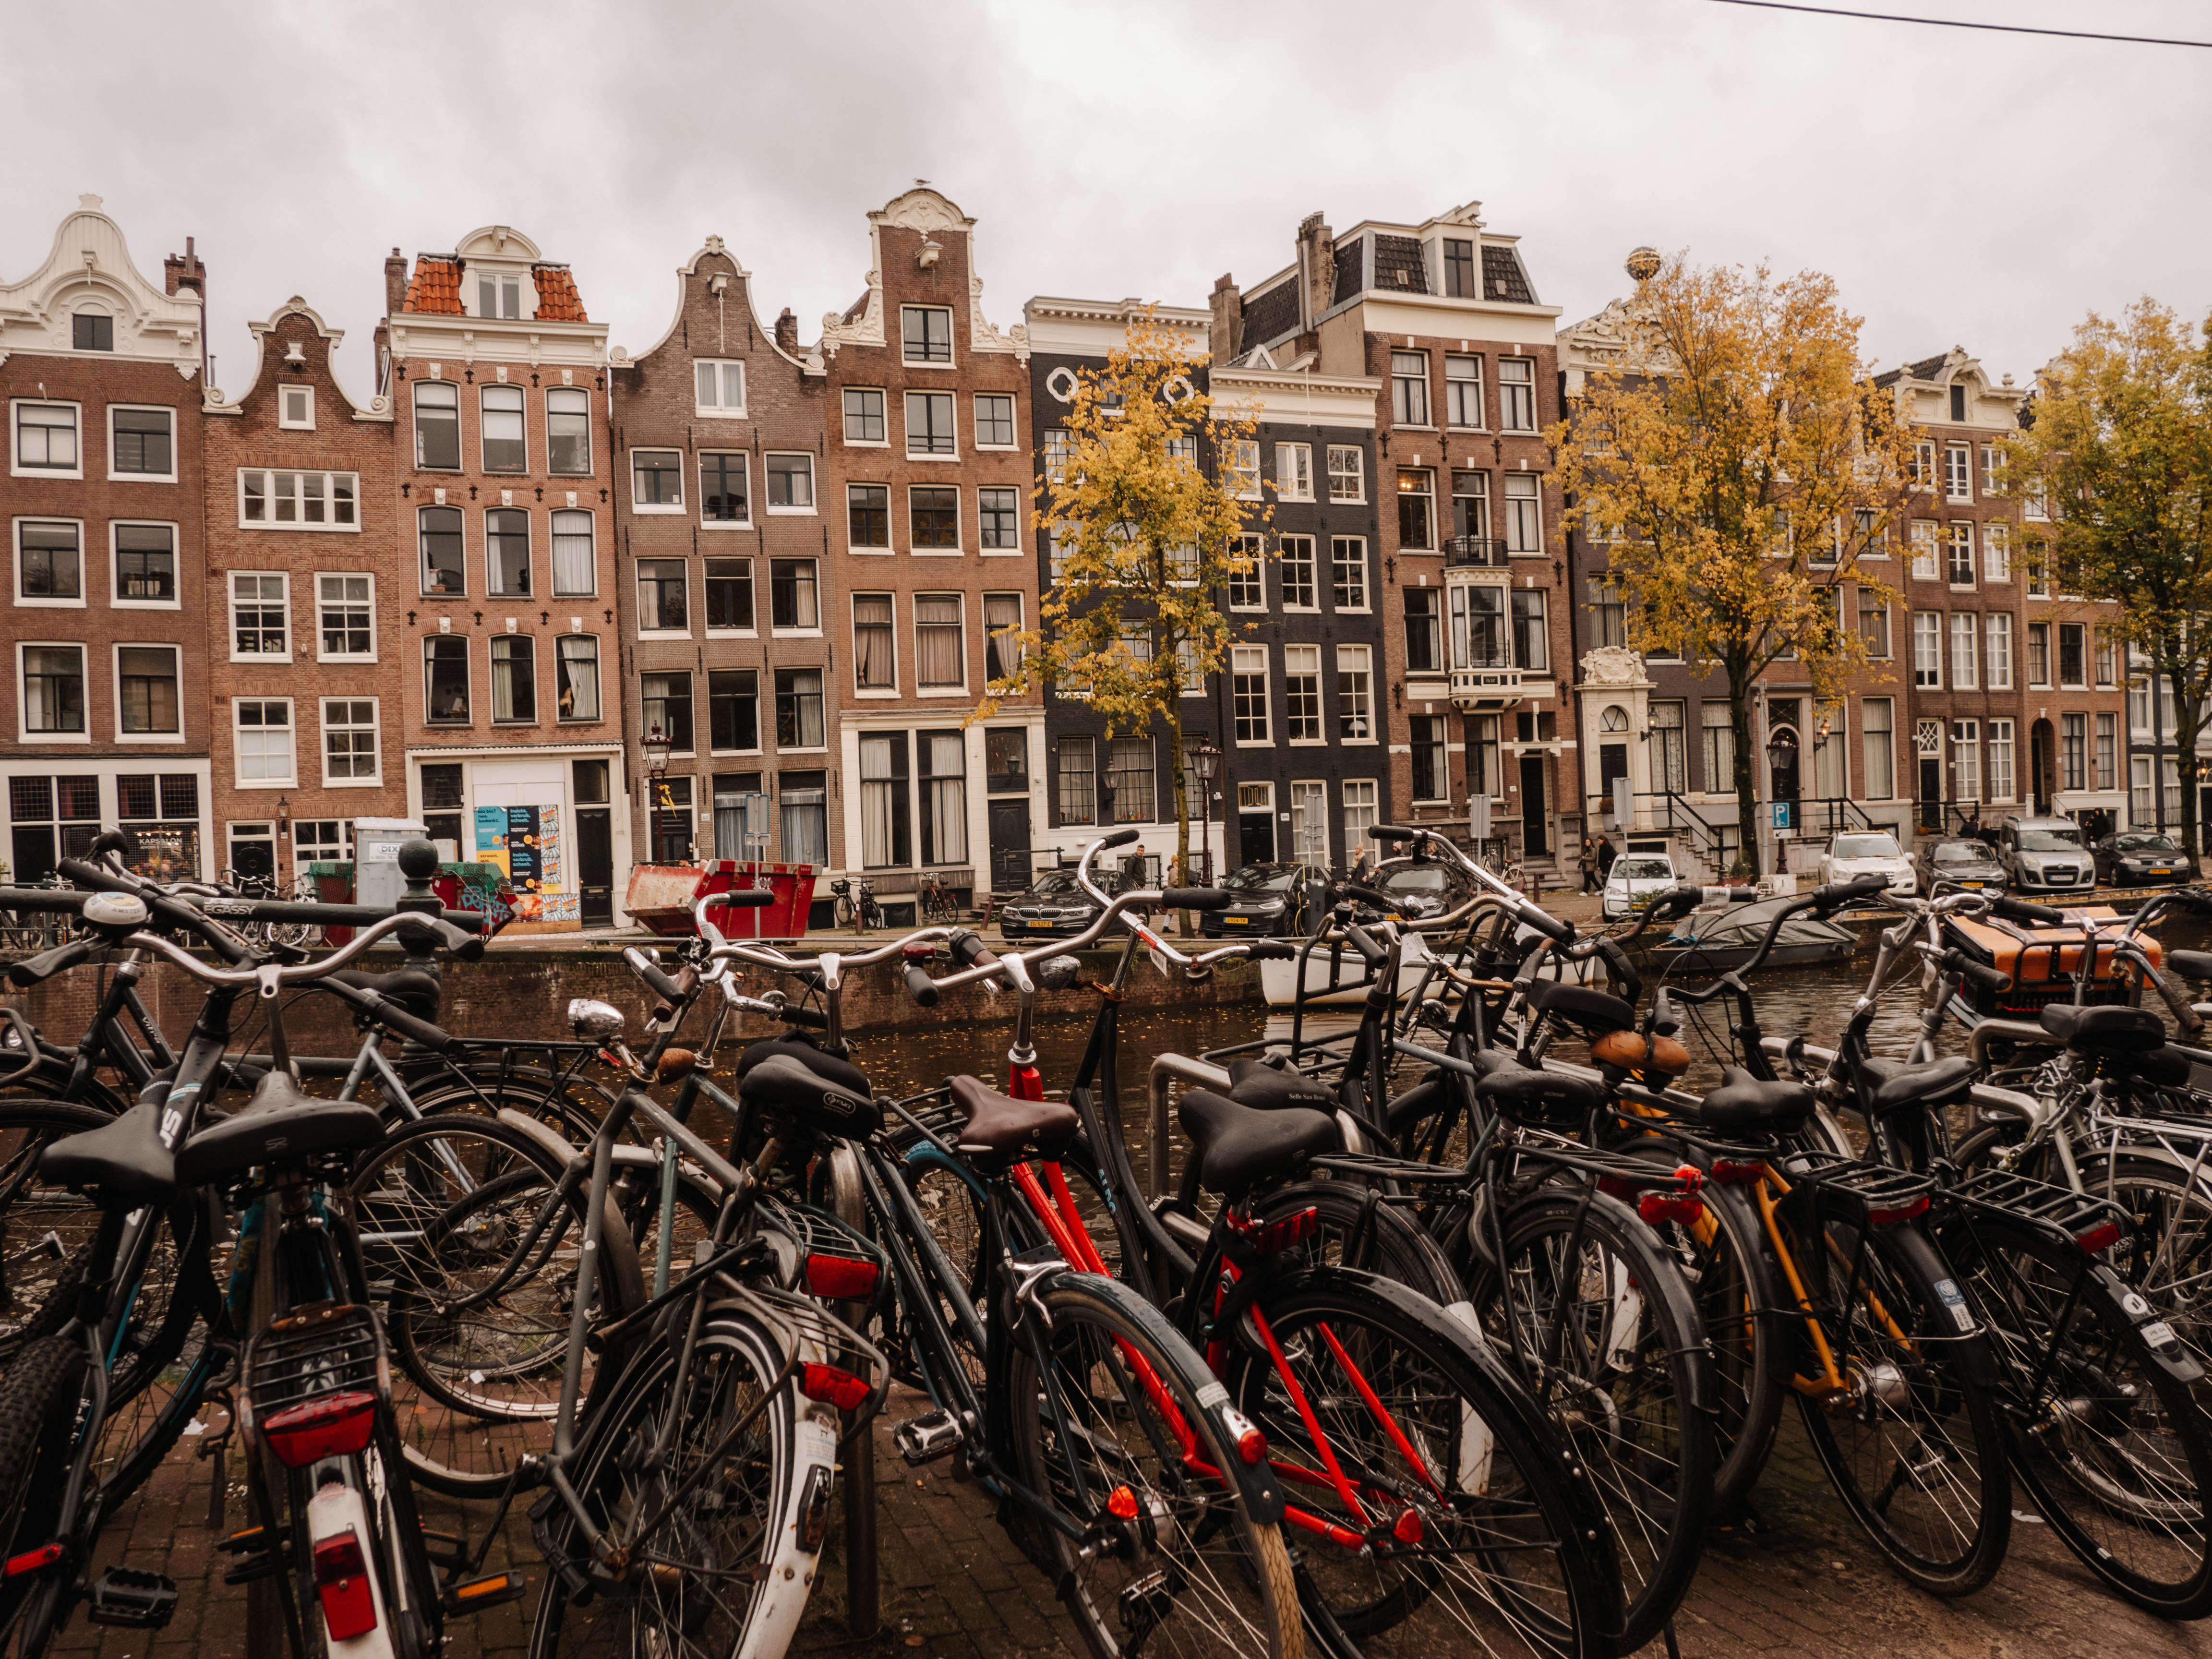 A typical canal-side view in Amsterdam, Netherlands, with a foreground of numerous parked bicycles and a backdrop of historic gabled houses, reflecting the city's cycling culture and distinctive architectural style on an overcast day.